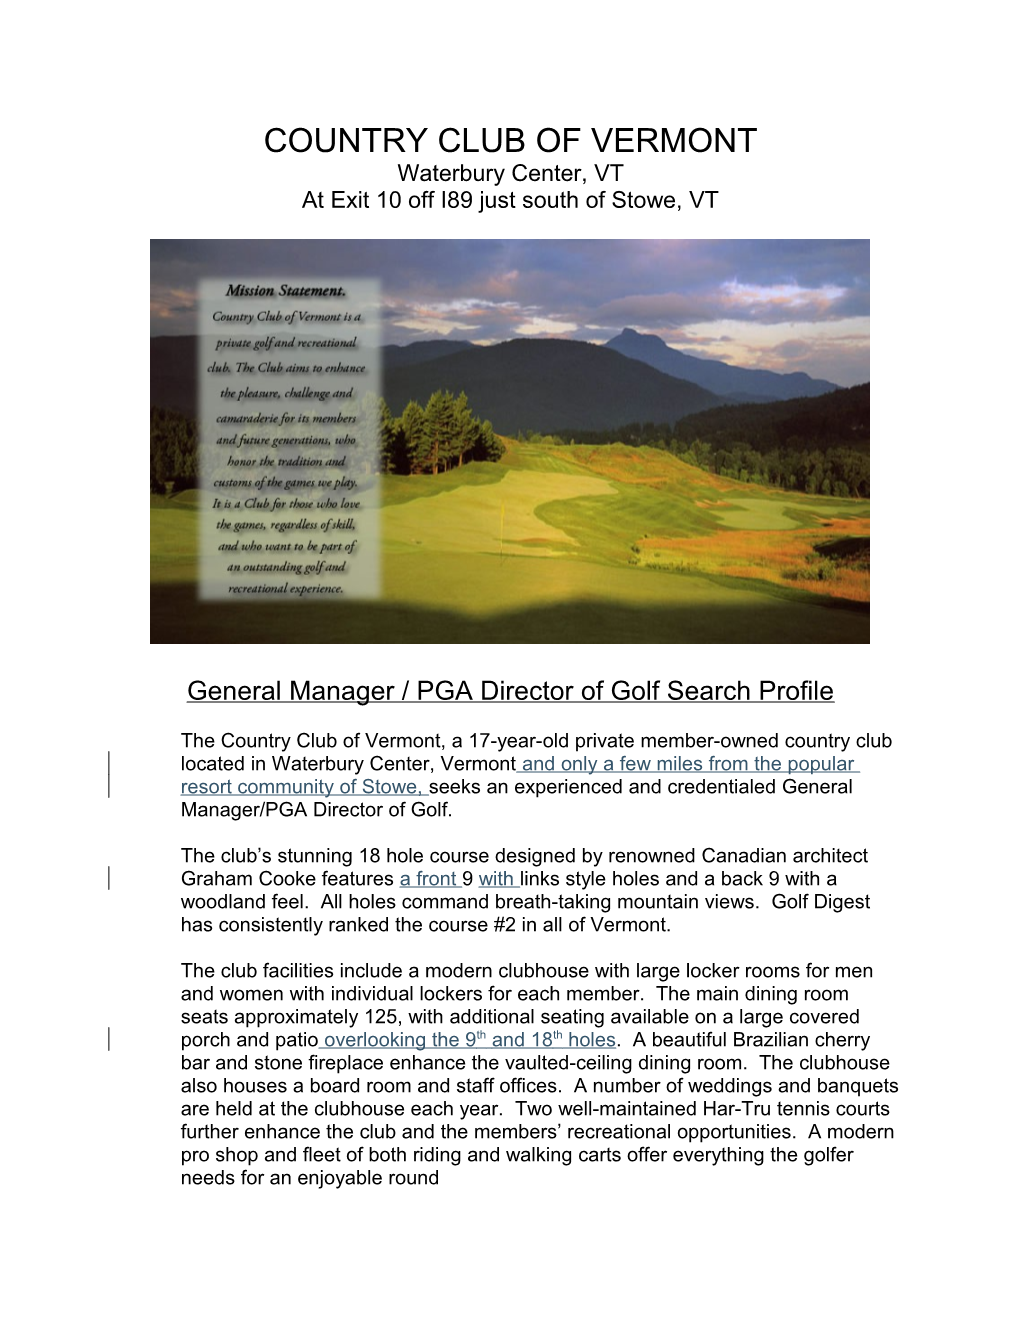 GM/PGA Experience and Credentials